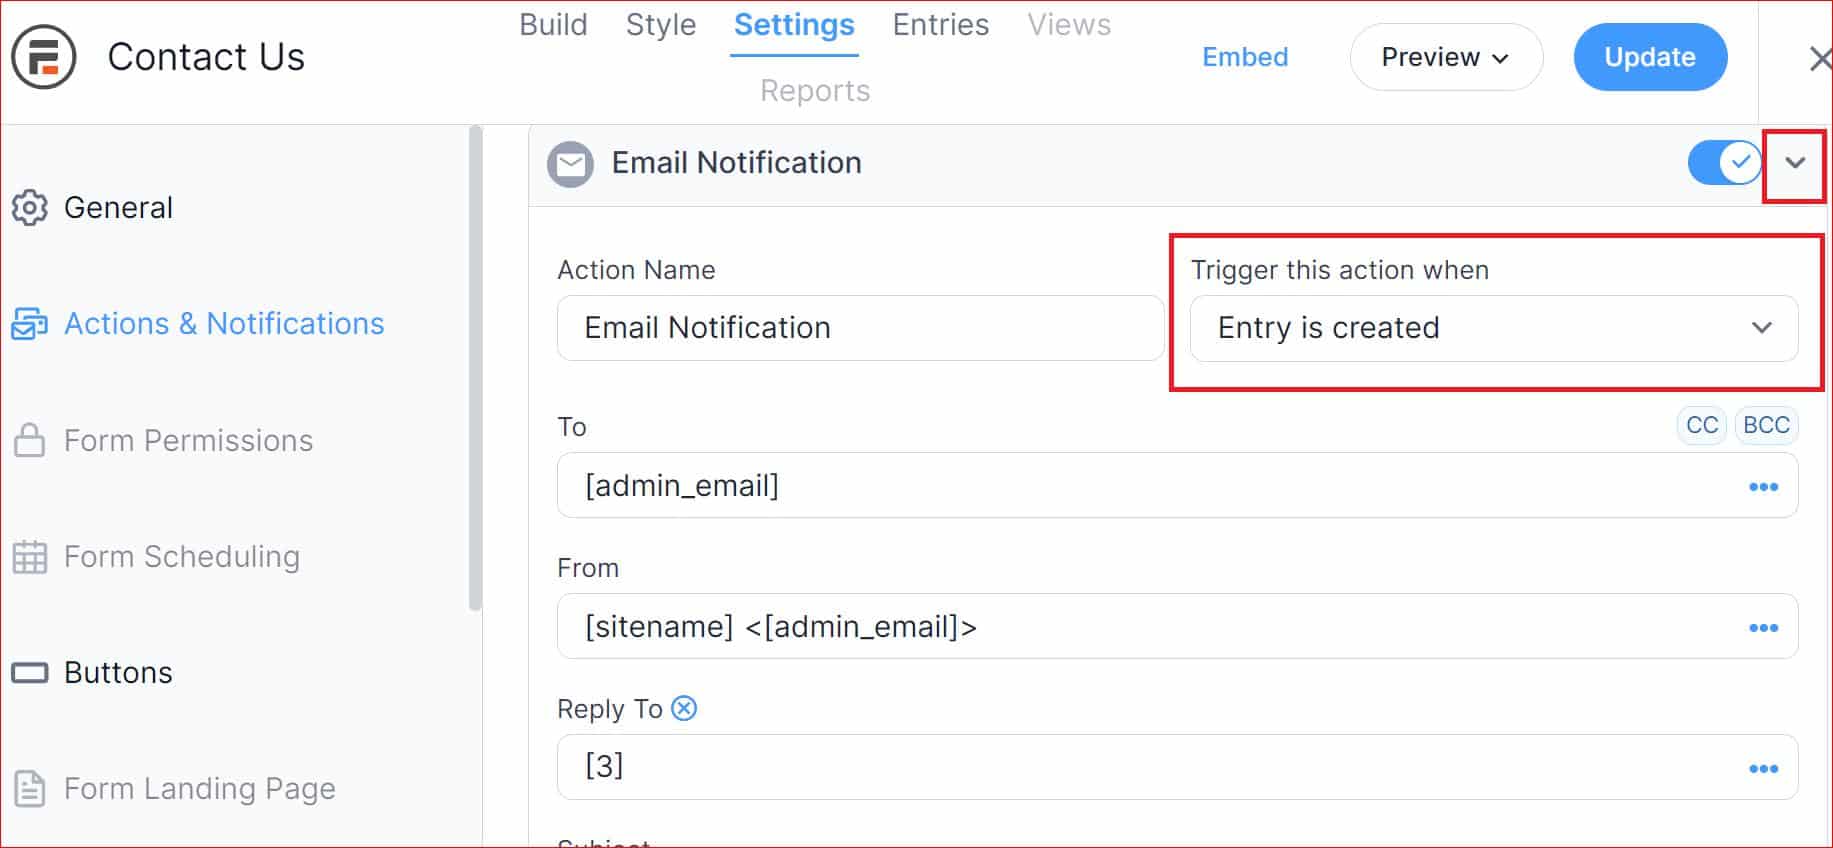 Expand the notifications settings